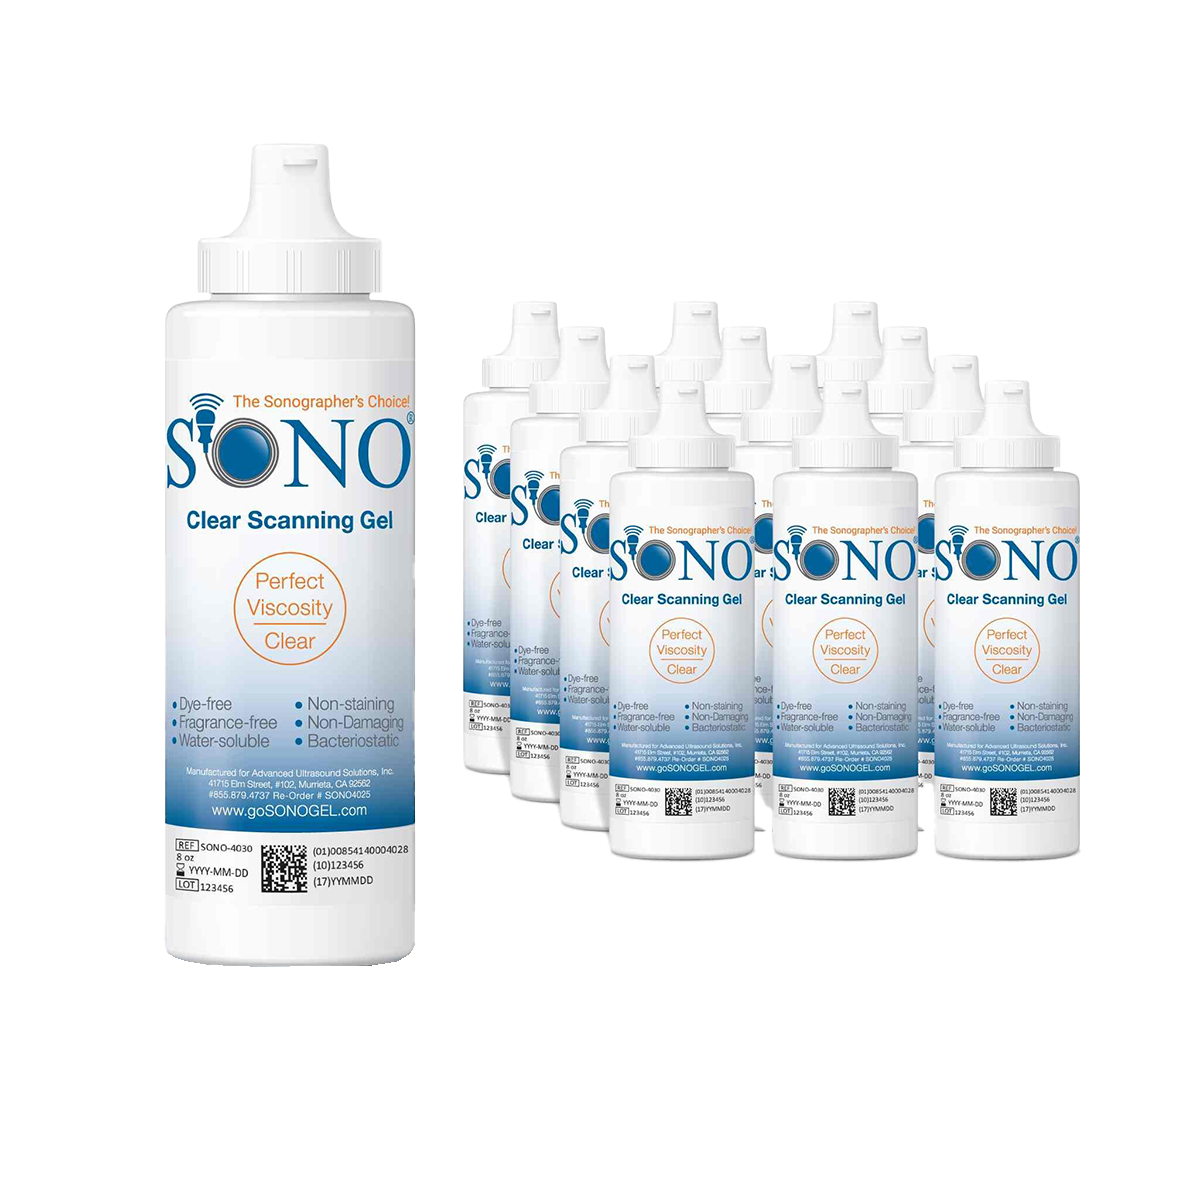 SONO Clear Ultrasound Scanning Gel - 12 Pack of 8 oz Bottles - Acoustically Correct for Broad Range of Frequencies